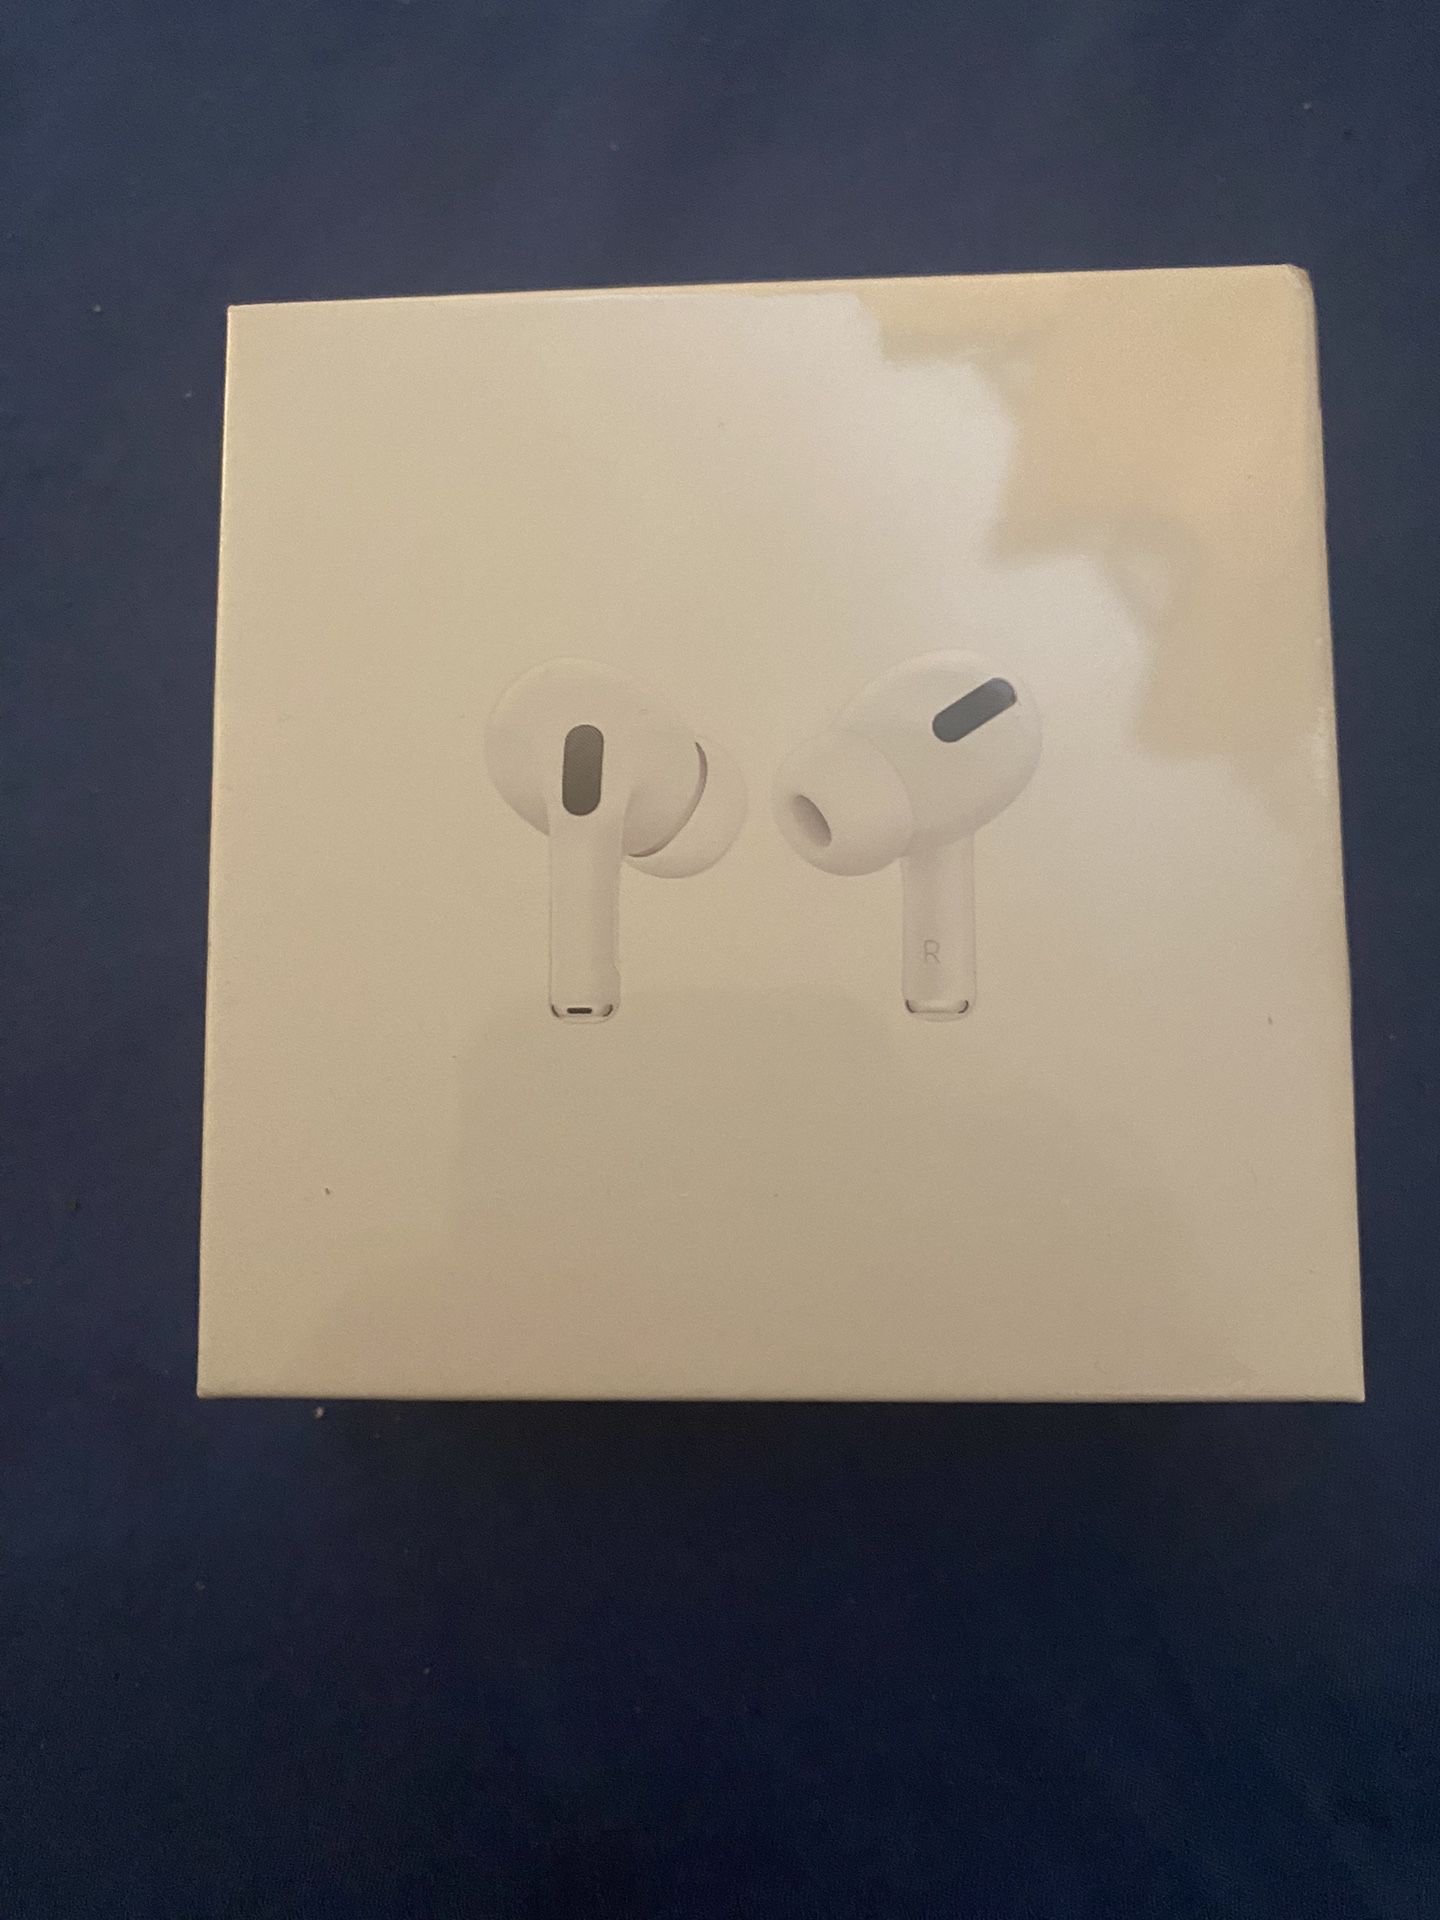 Air pods pro unboxed brand new FREE